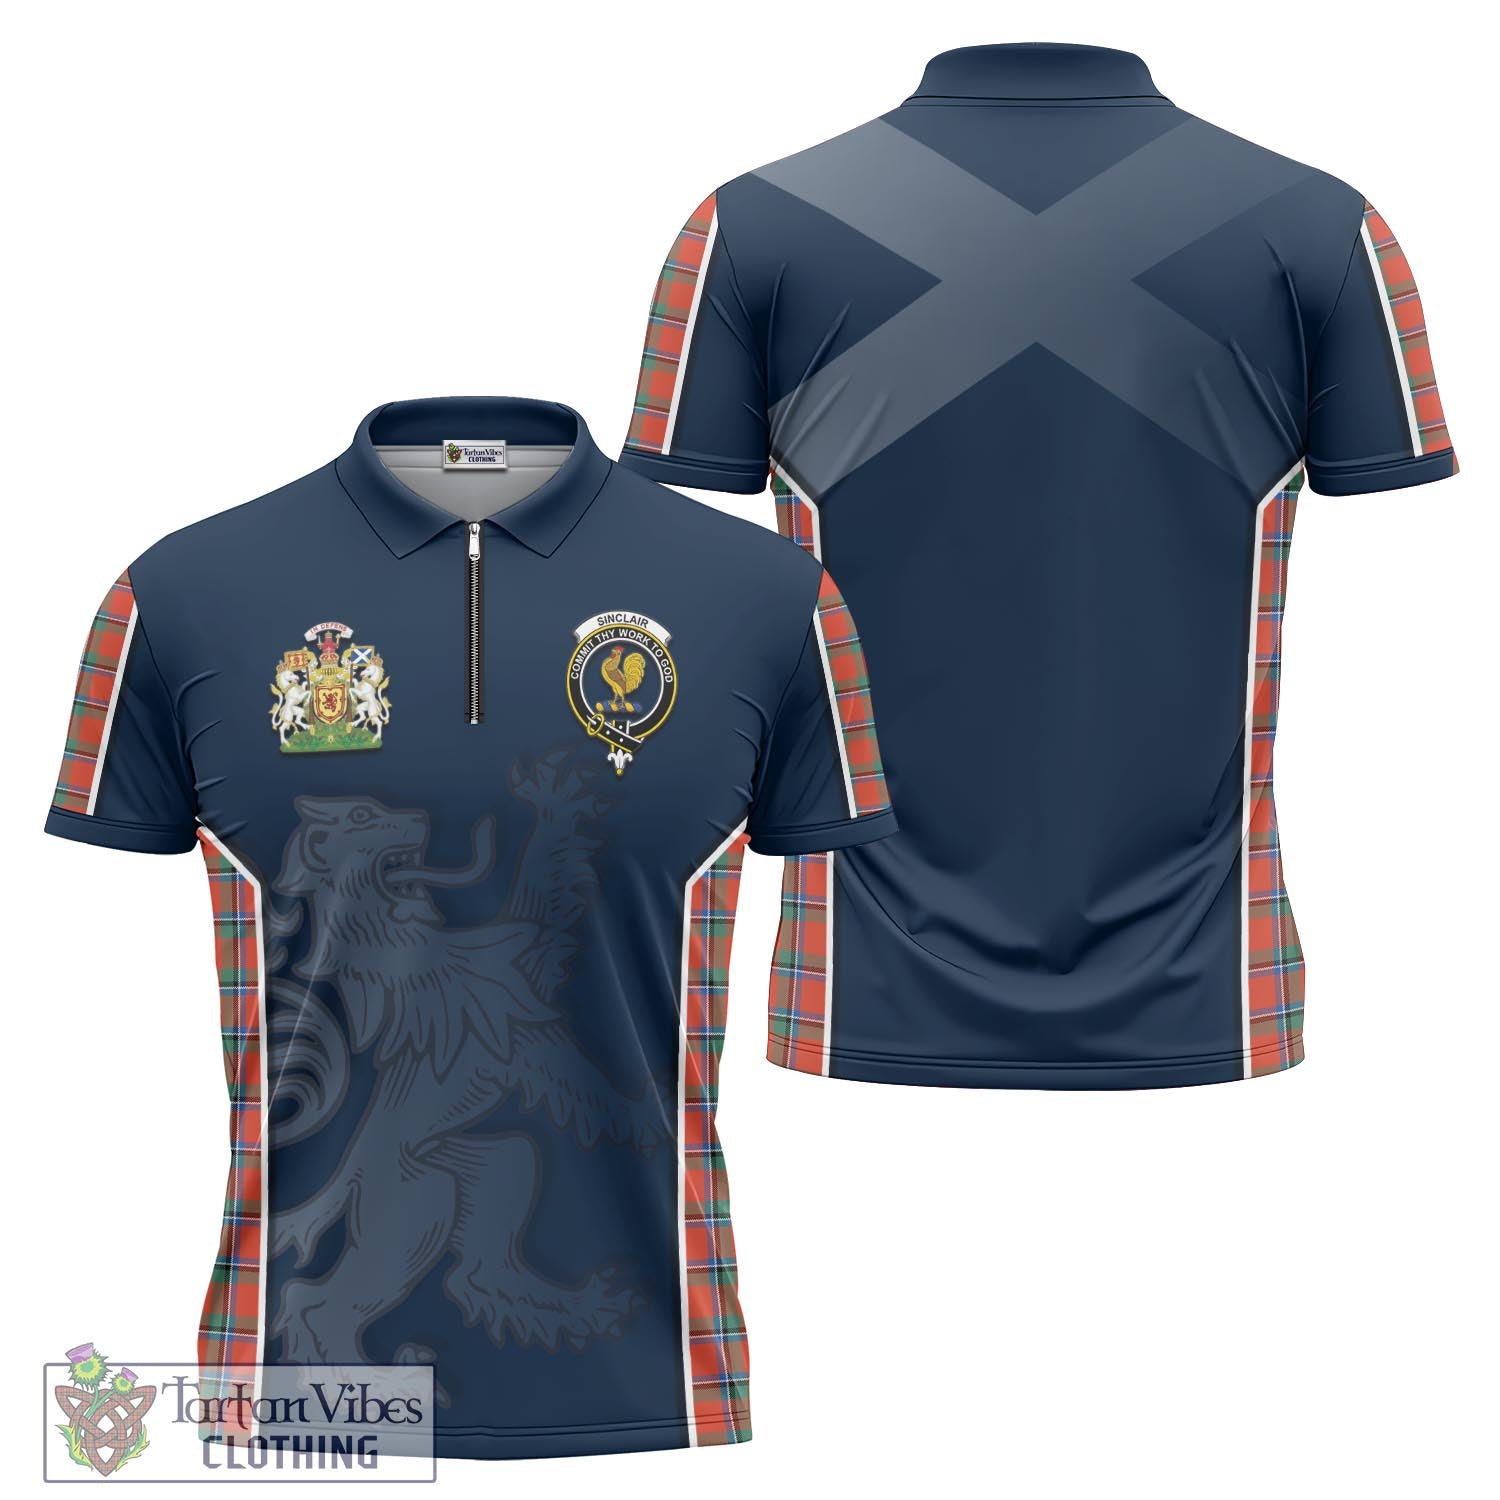 Tartan Vibes Clothing Sinclair Ancient Tartan Zipper Polo Shirt with Family Crest and Lion Rampant Vibes Sport Style